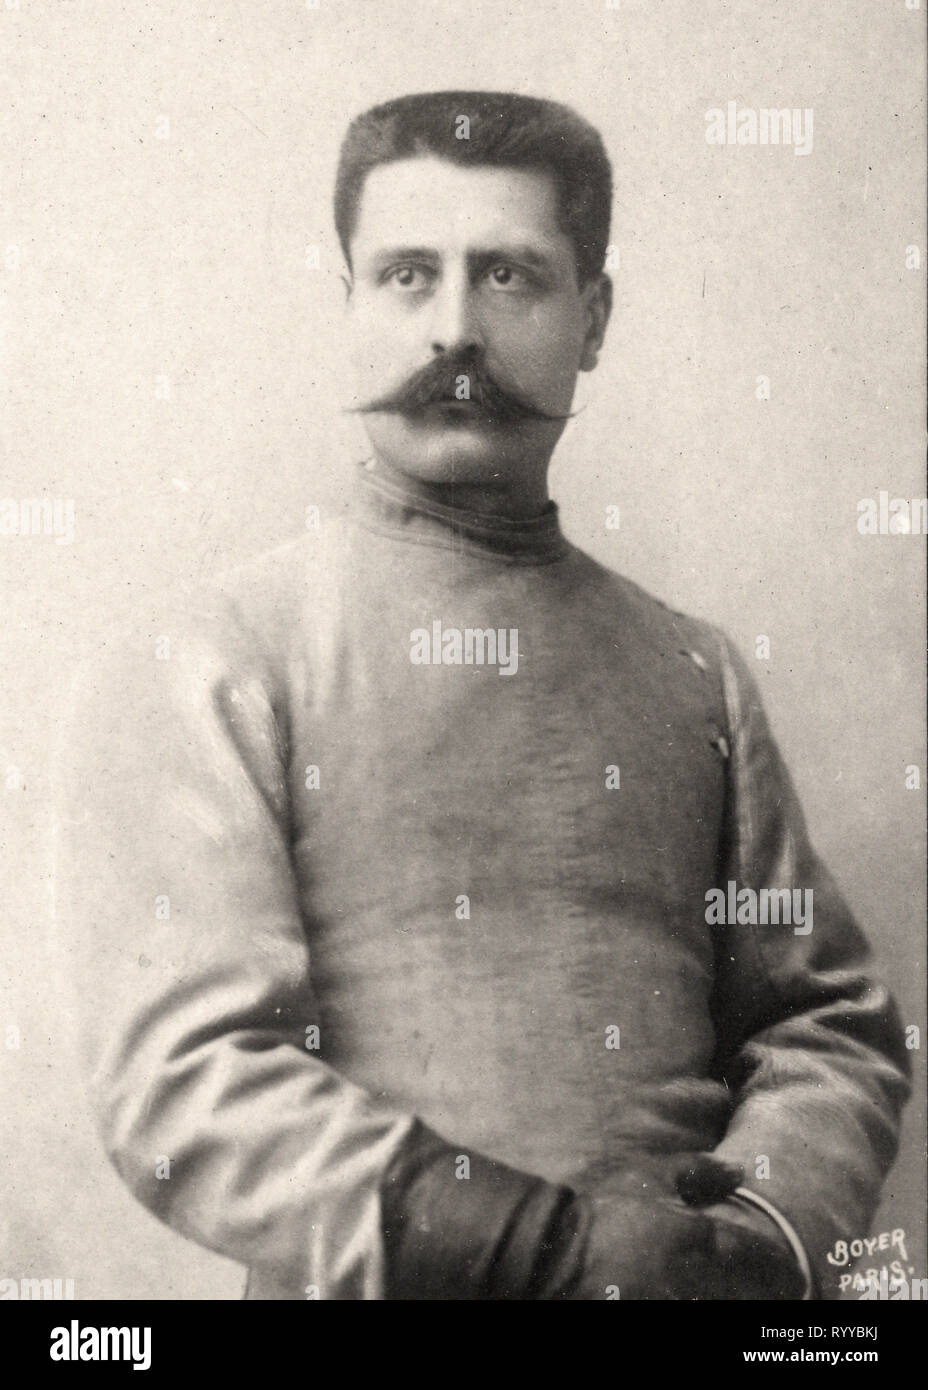 Photographic Portrait Of Mrignac   From Collection Félix Potin, Early 20th Century Stock Photo